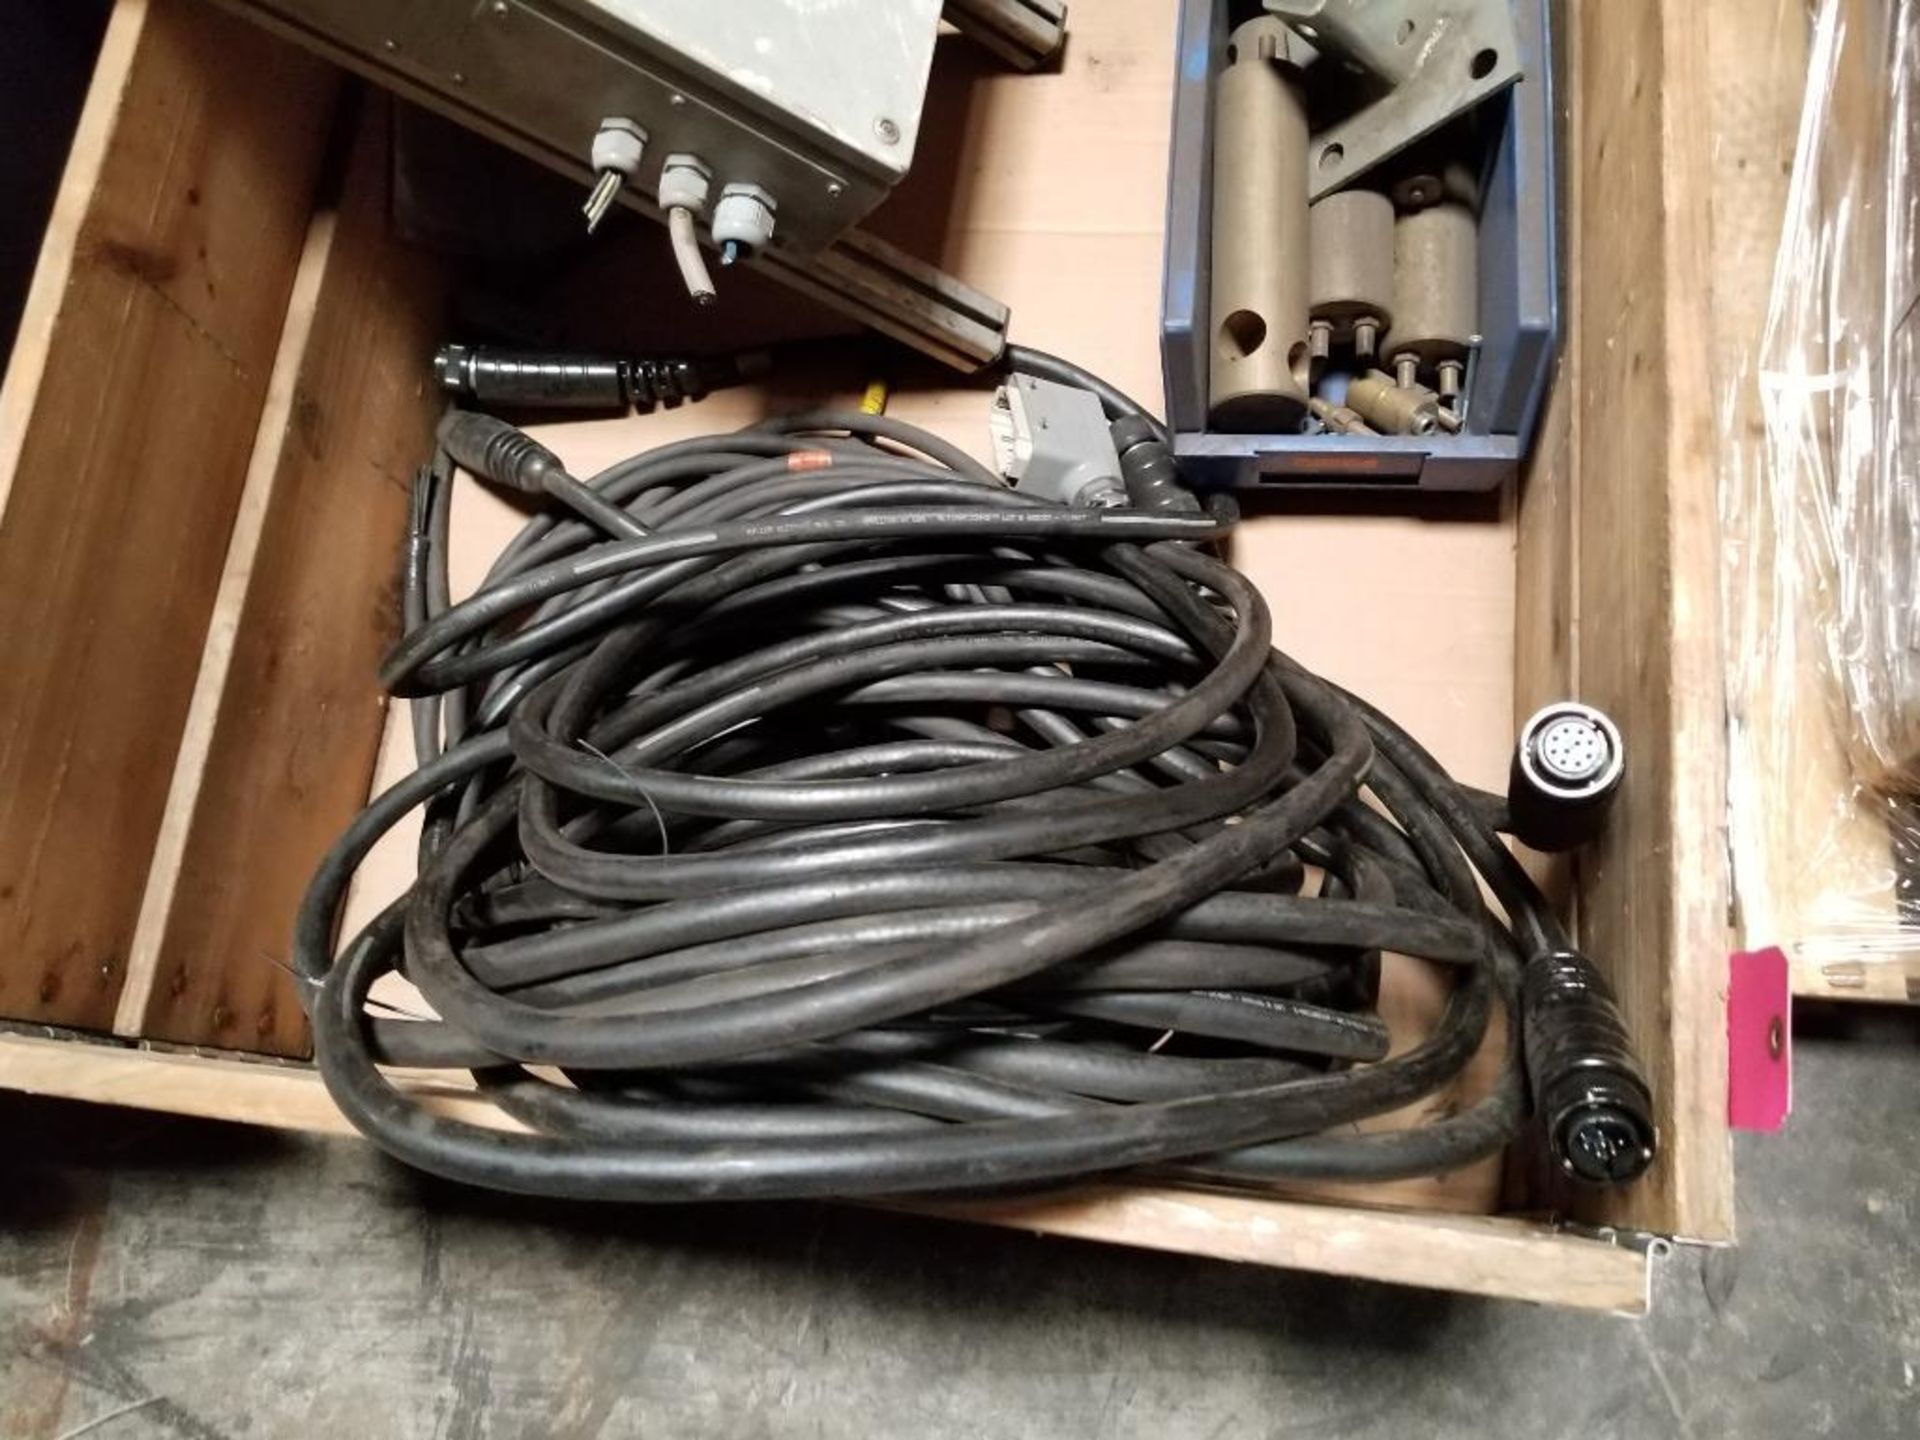 Assorted electrical cable, controller. - Image 2 of 5